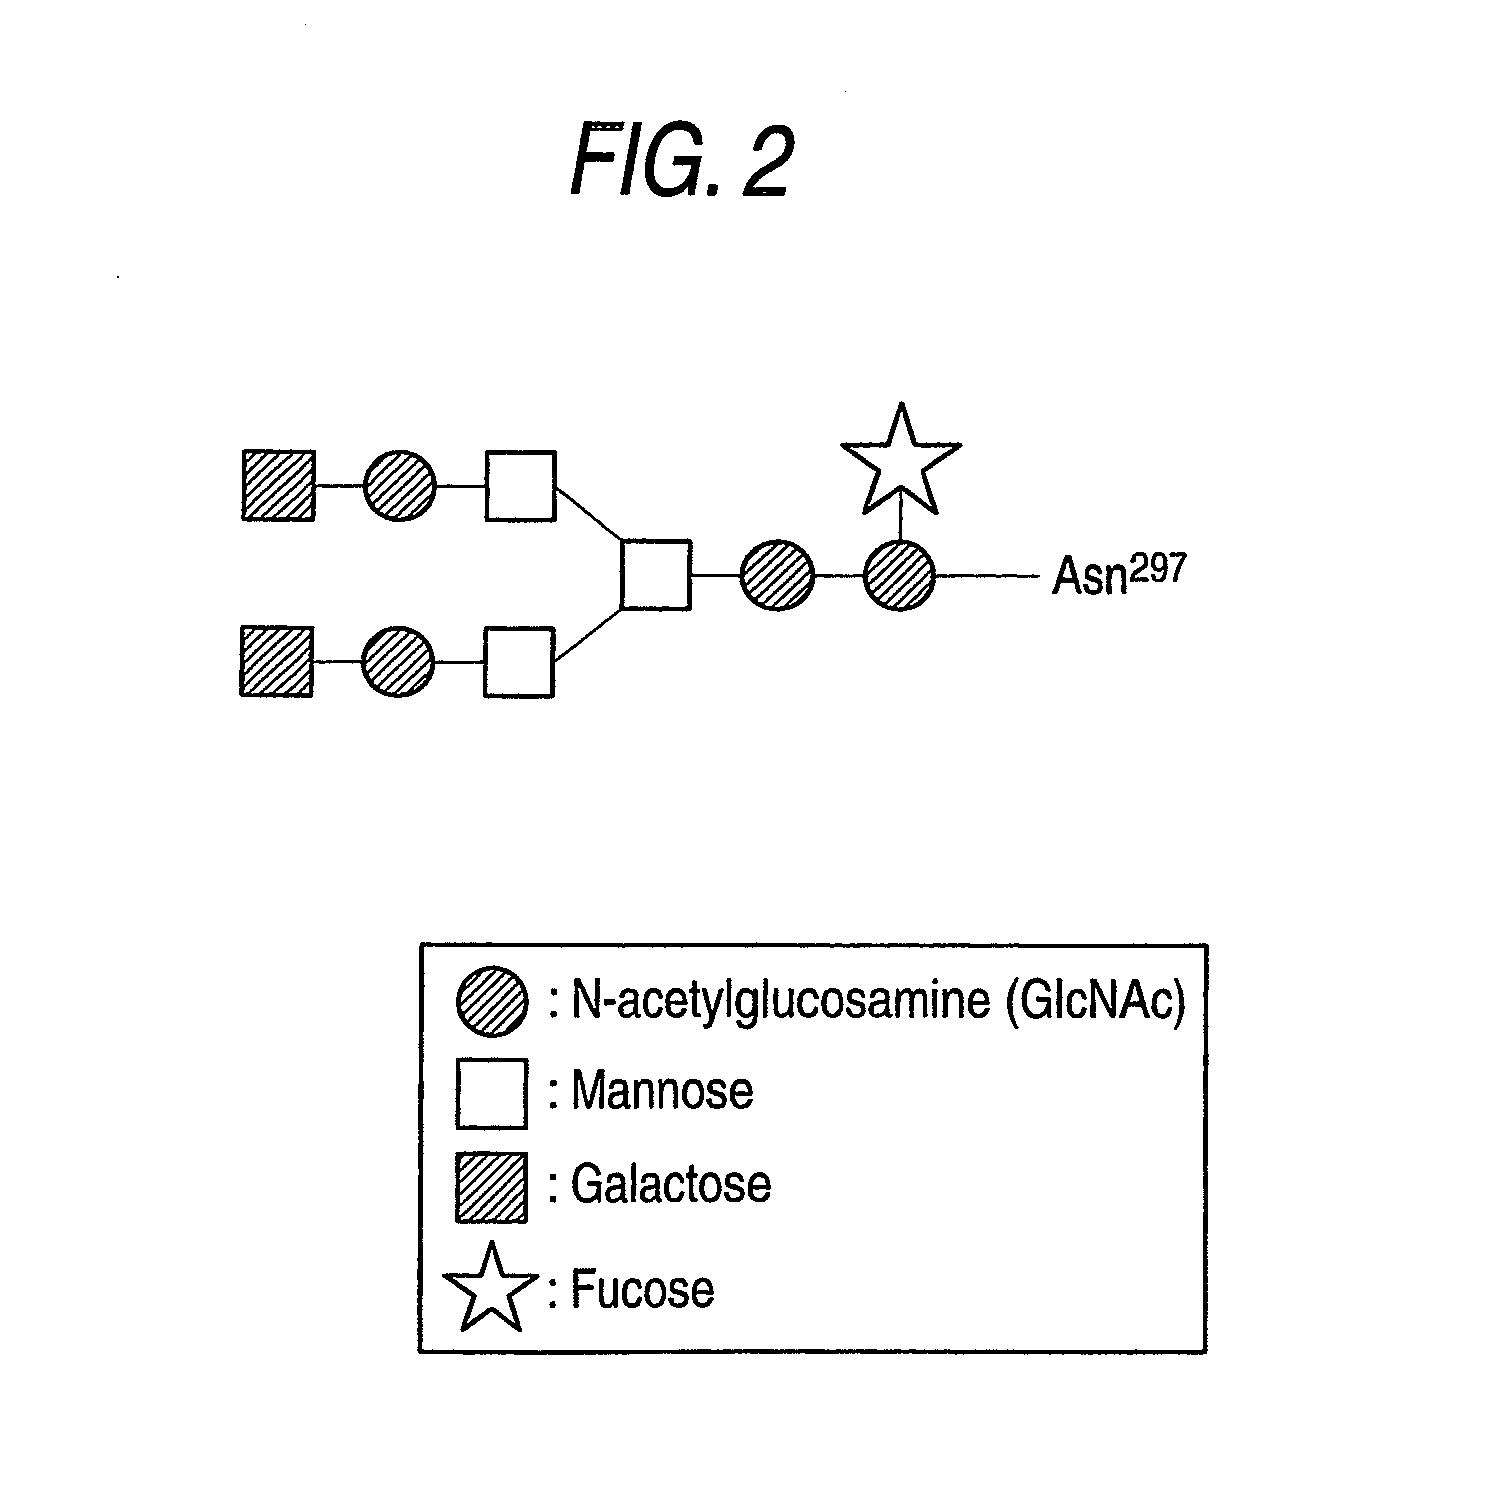 Genetically recombinant antibody composition capable of binding specifically to ganglioside gm2